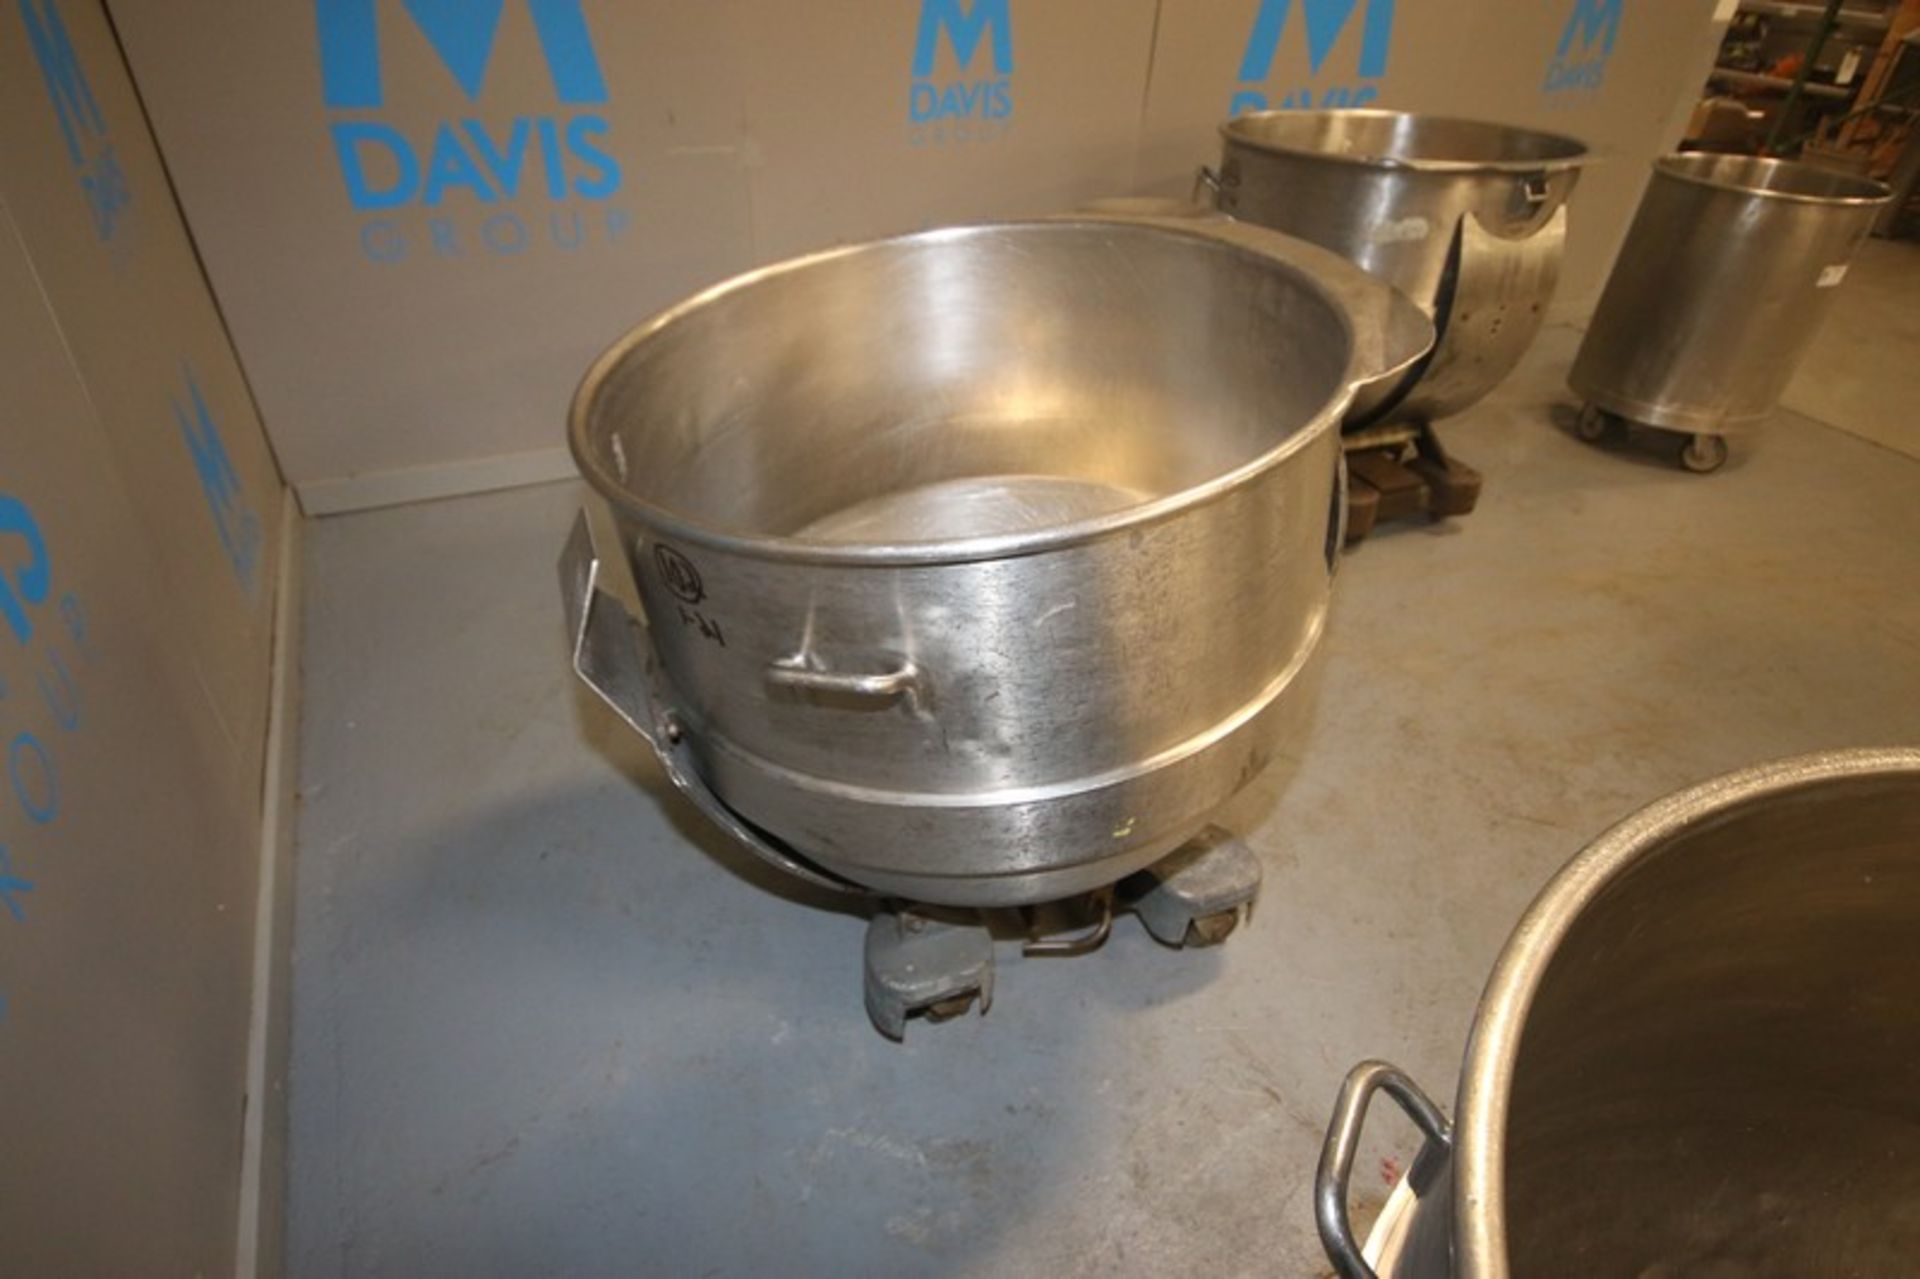 S/S Mixing Bowl, Internal Dims.:  Aprox. 32-1/2" Dia. x 26-1/2" Deep, Mounted on Portable Cart ( - Image 4 of 7